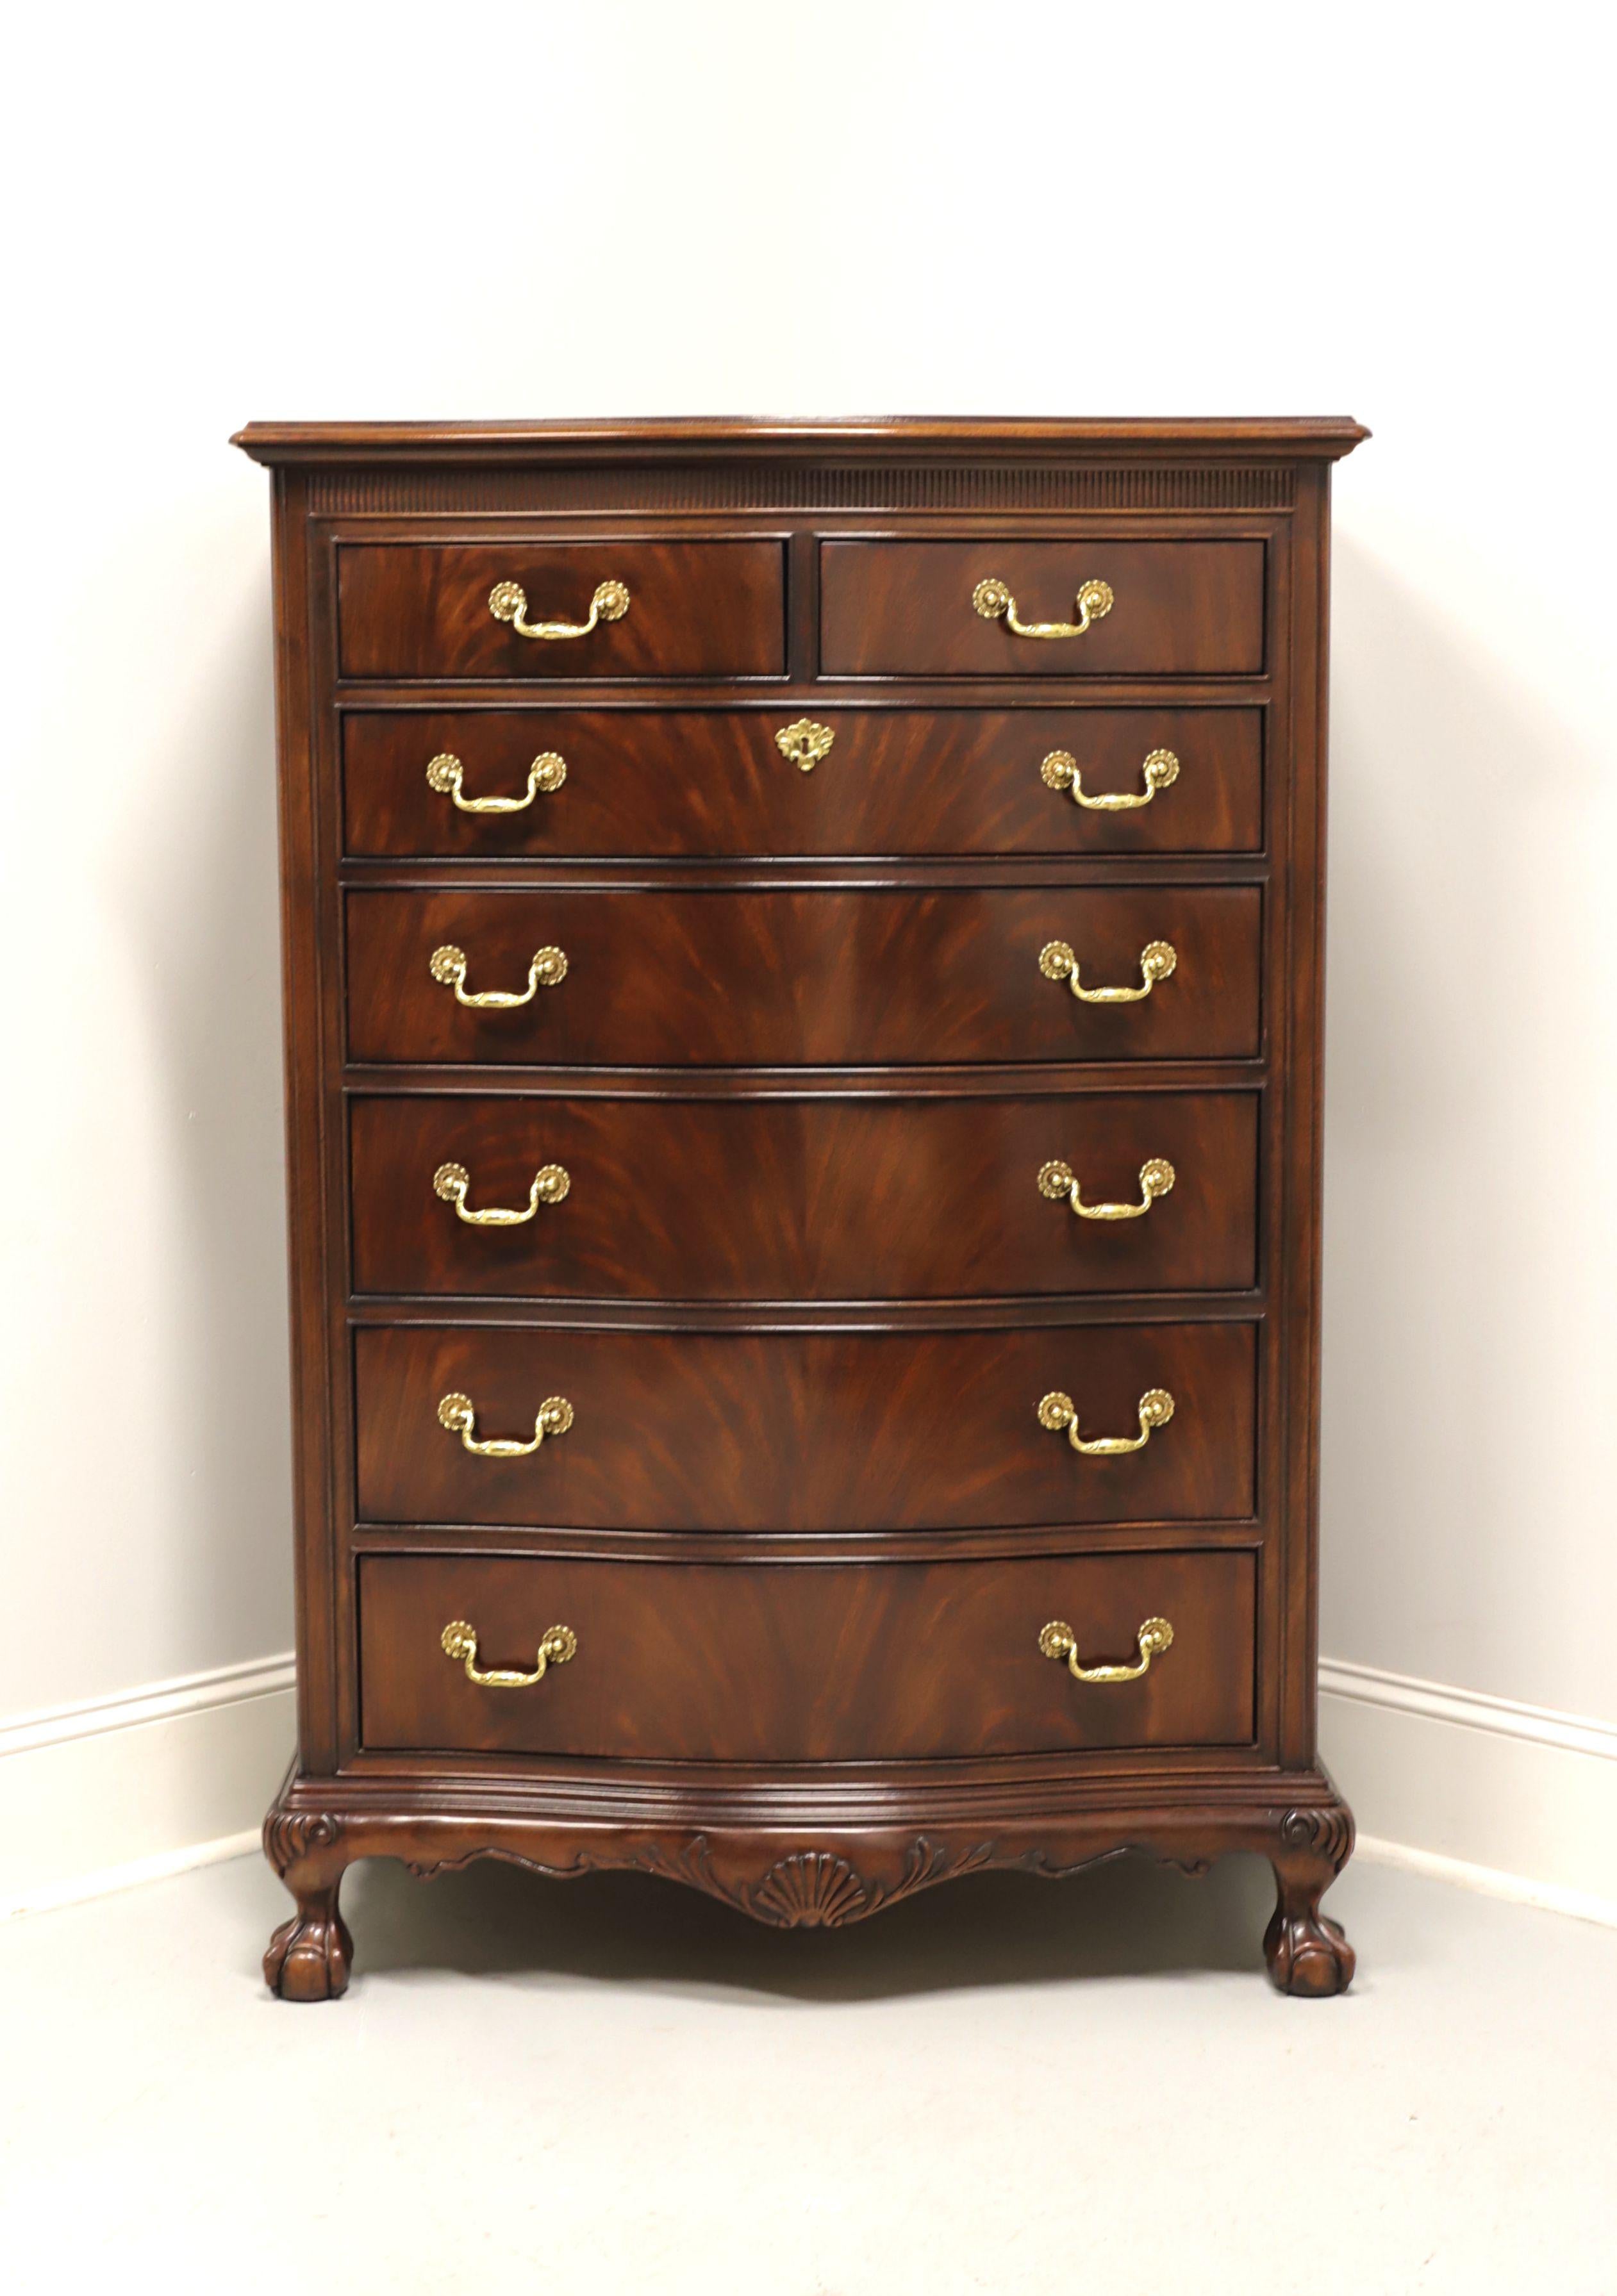 A Chippendale style chest of drawers by Drexel Heritage, from their Heirlooms Collection. Flame mahogany with serpentine front, brass hardware, fluting across top of front, decoratively carved apron with center shell, carved knees and ball in claw